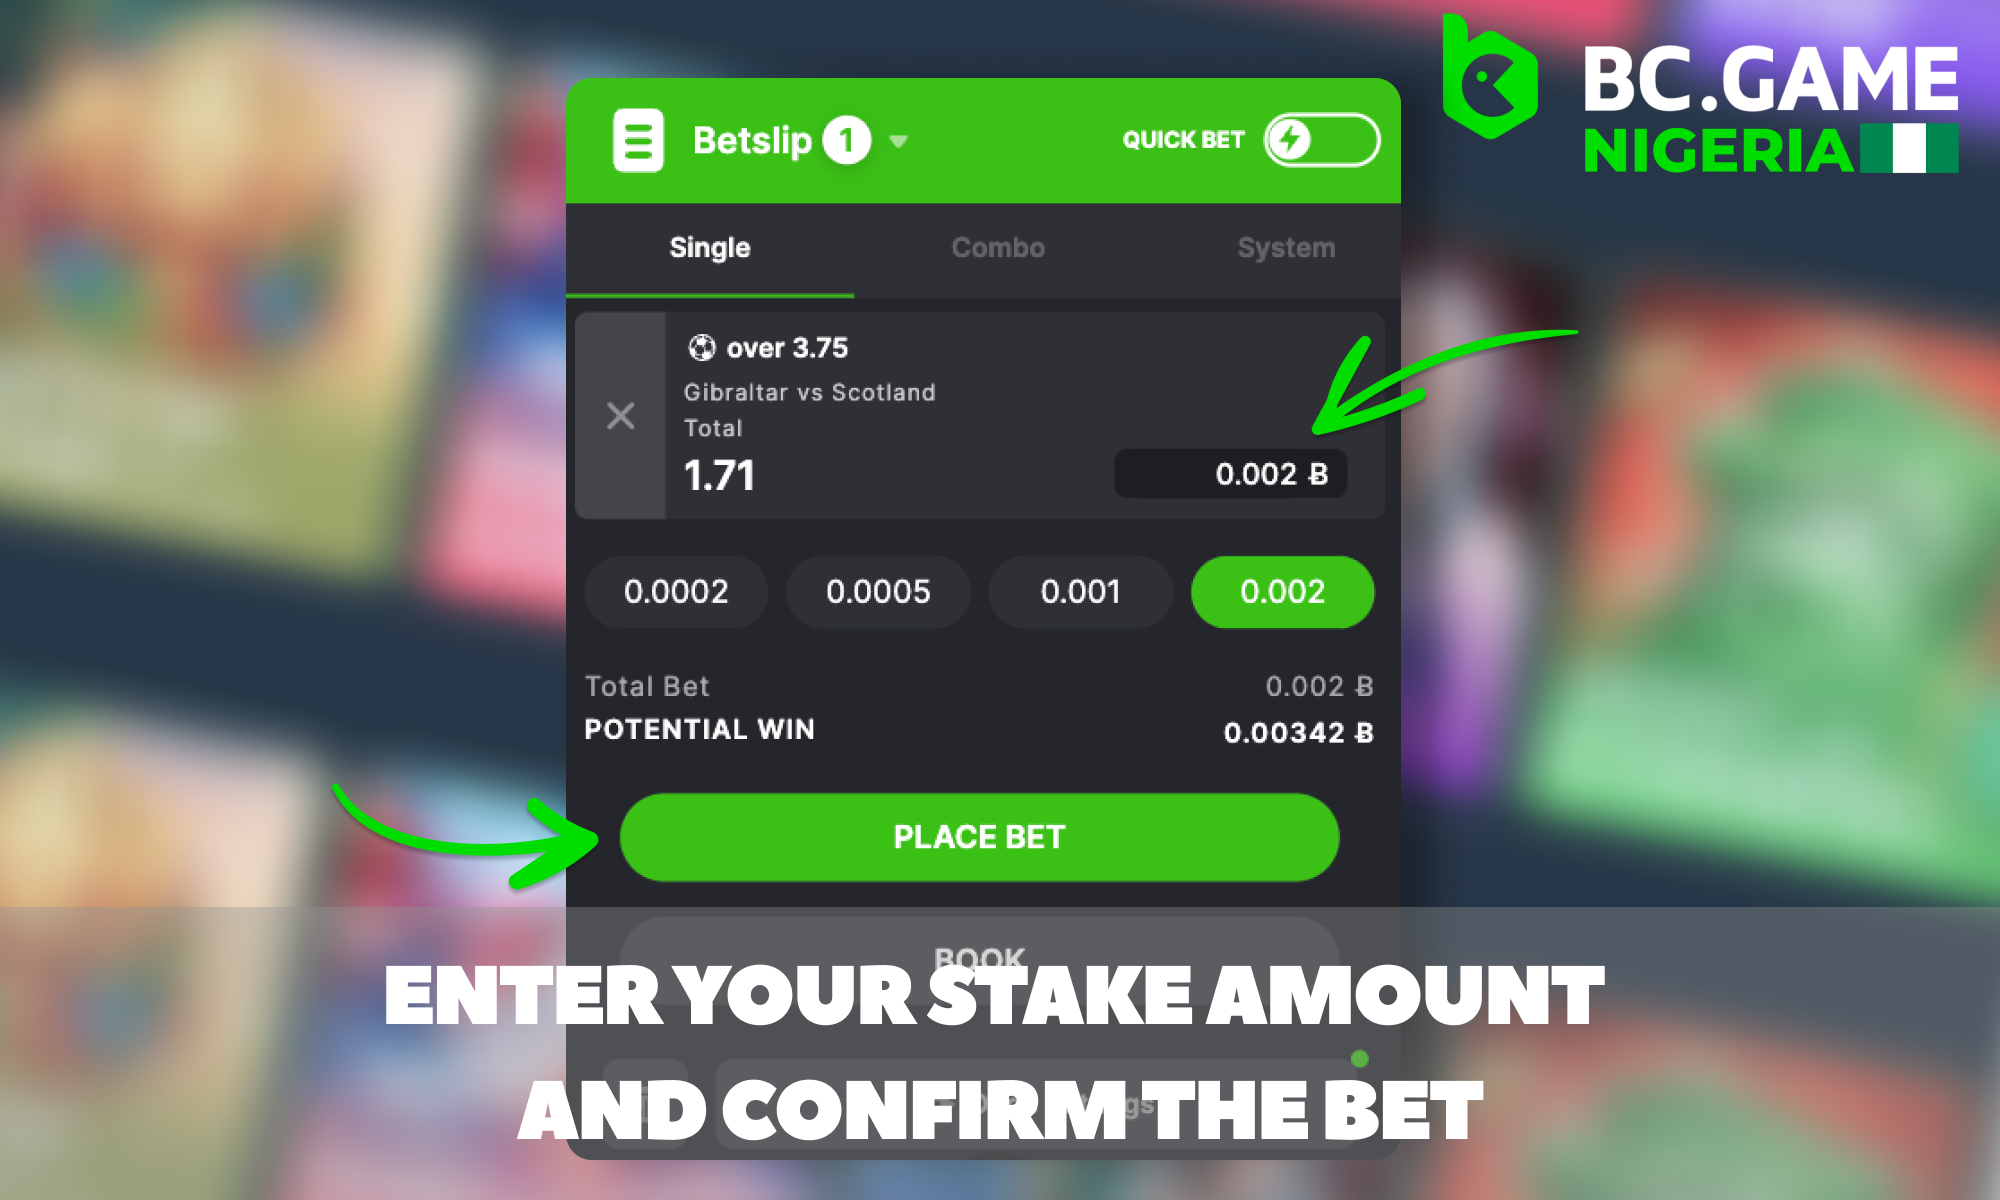 Enter your stake - BC Game in Nigeria